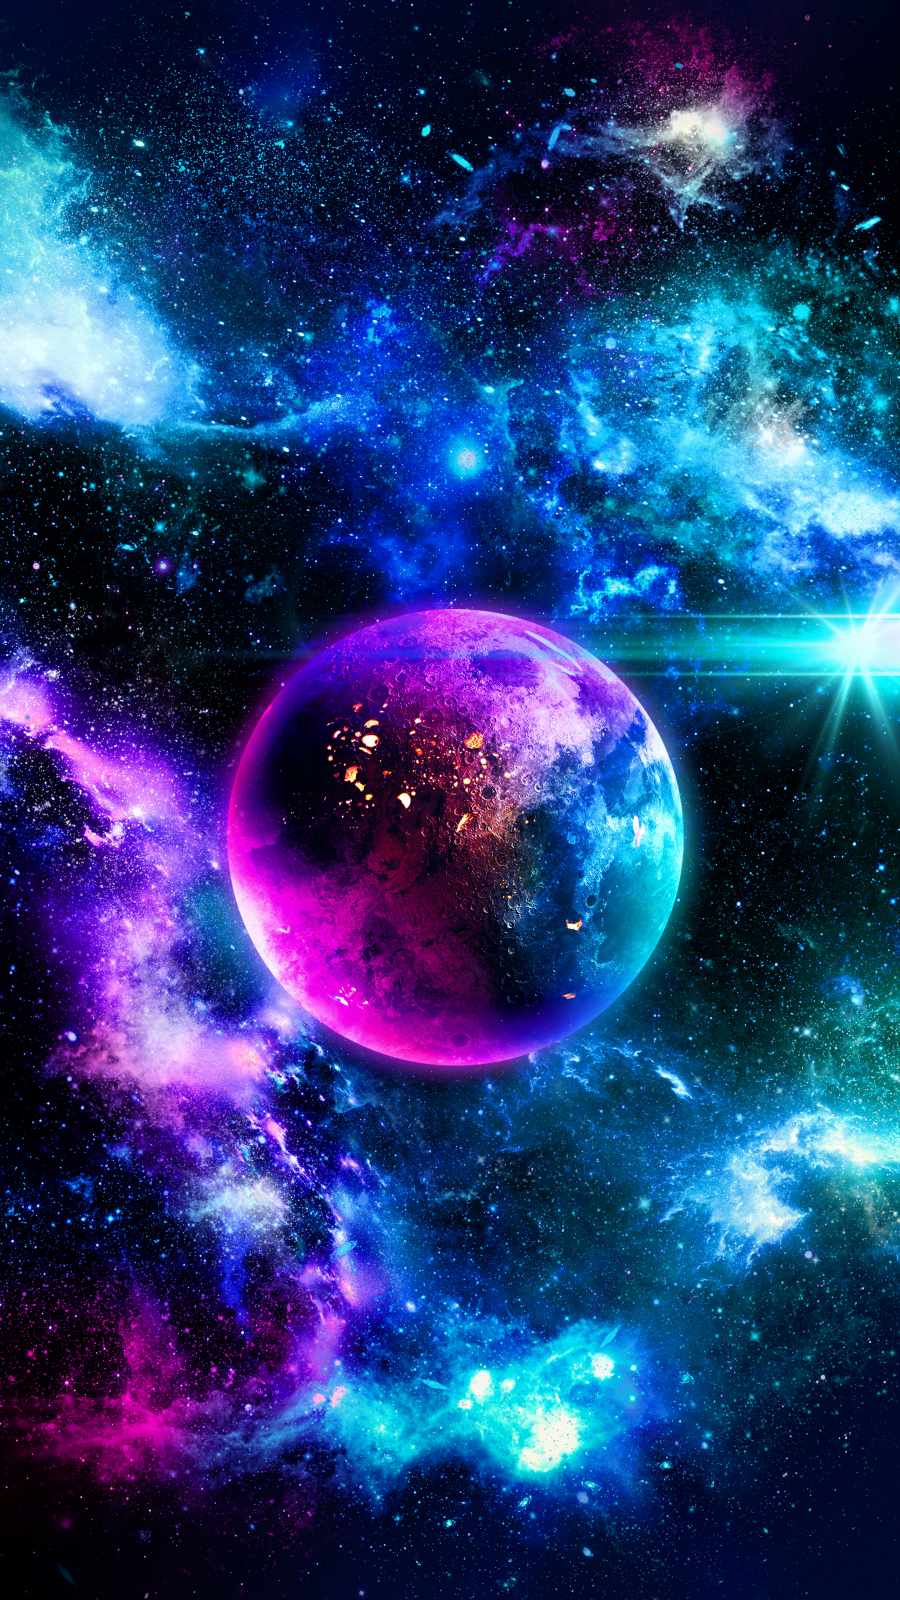 Colorful Space 4K IPhone Wallpaper - IPhone Wallpapers : iPhone Wallpapers